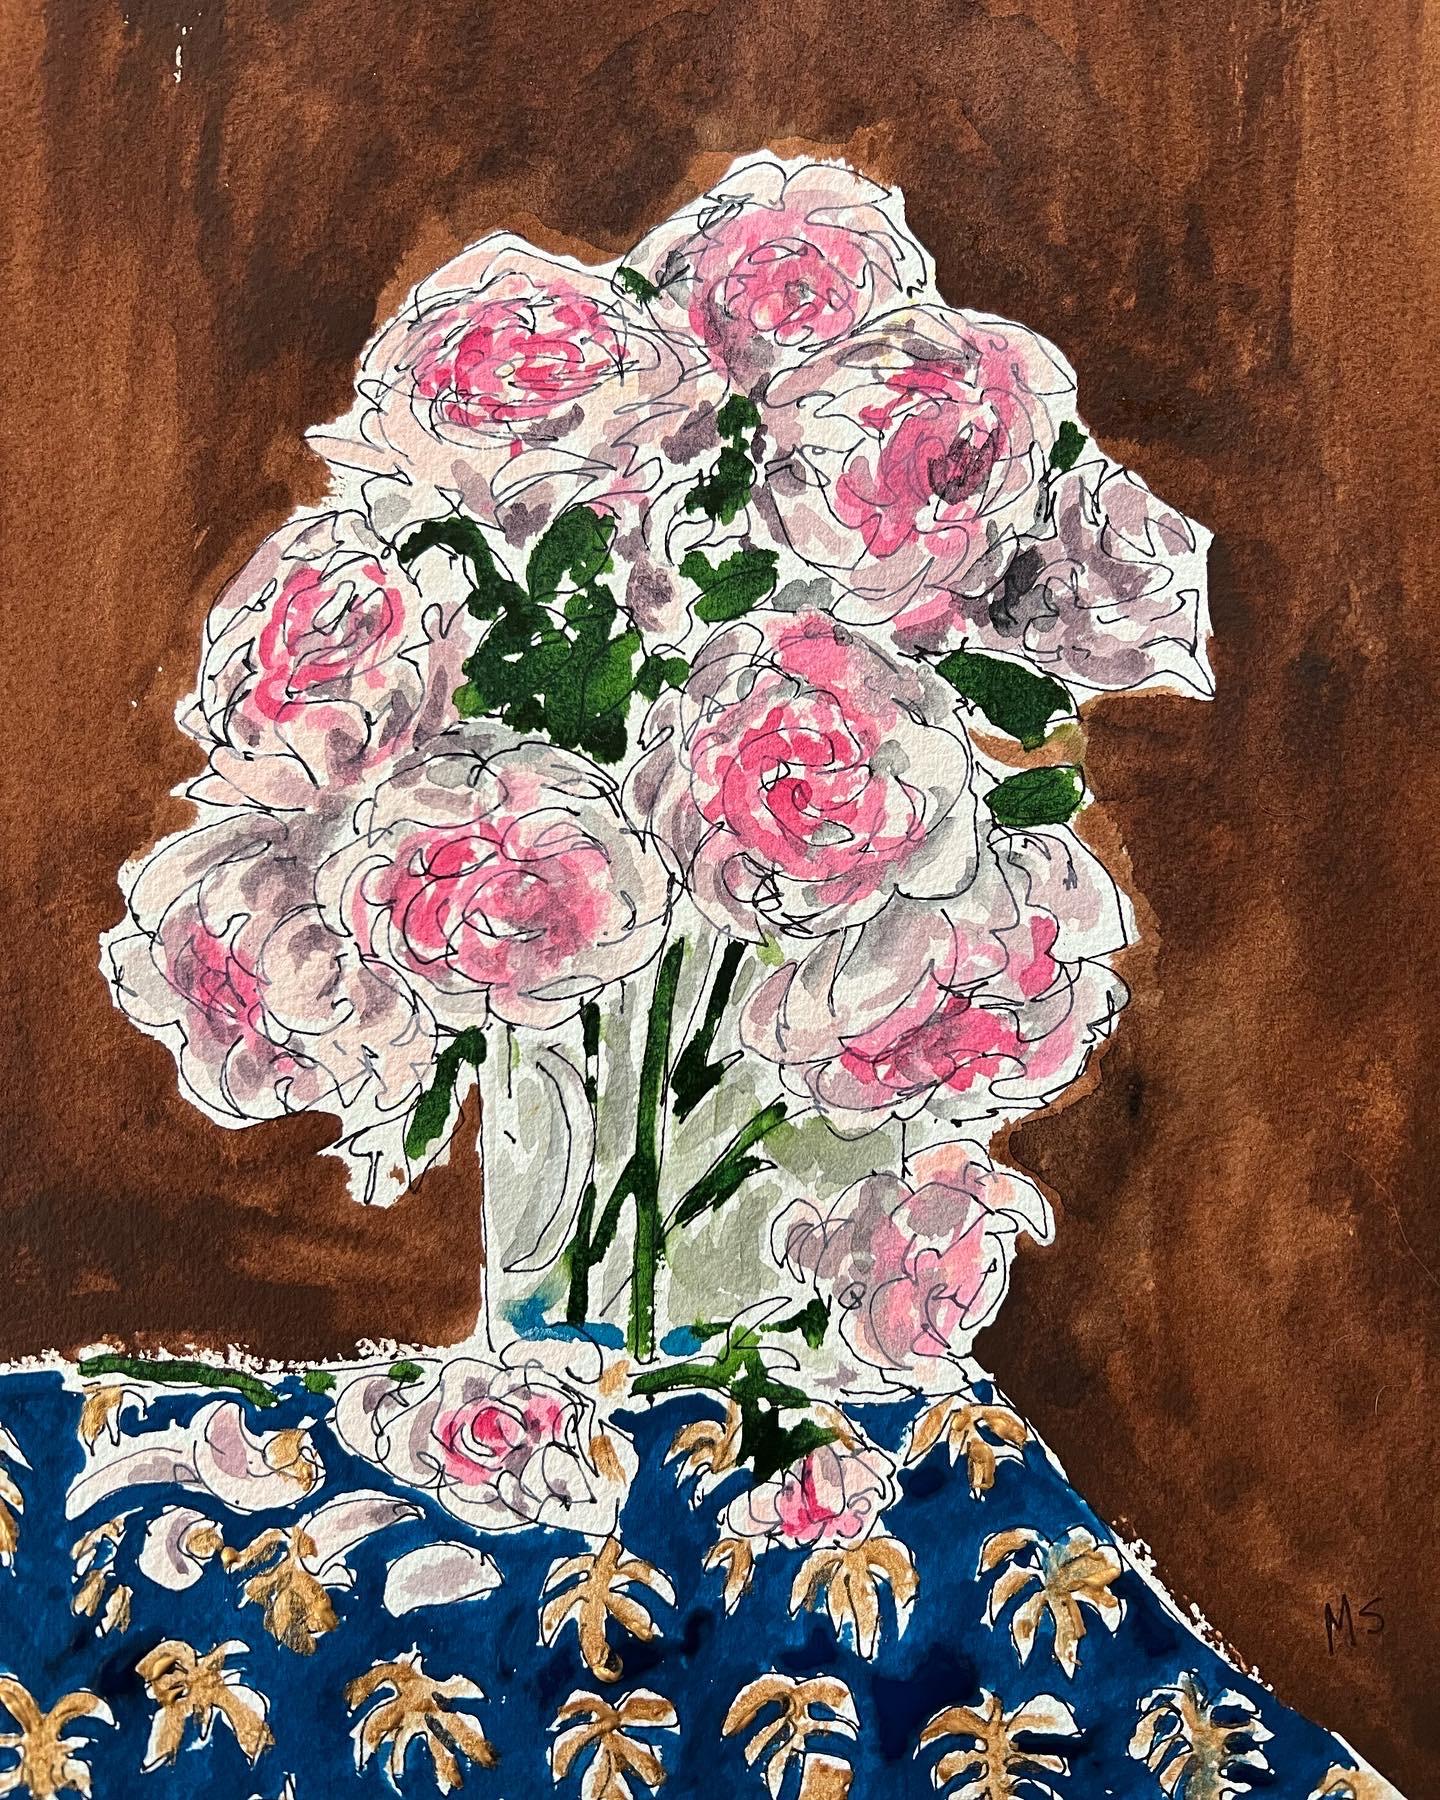 A vase full of Roses. Ink pen, Gouache, and watercolor on paper 